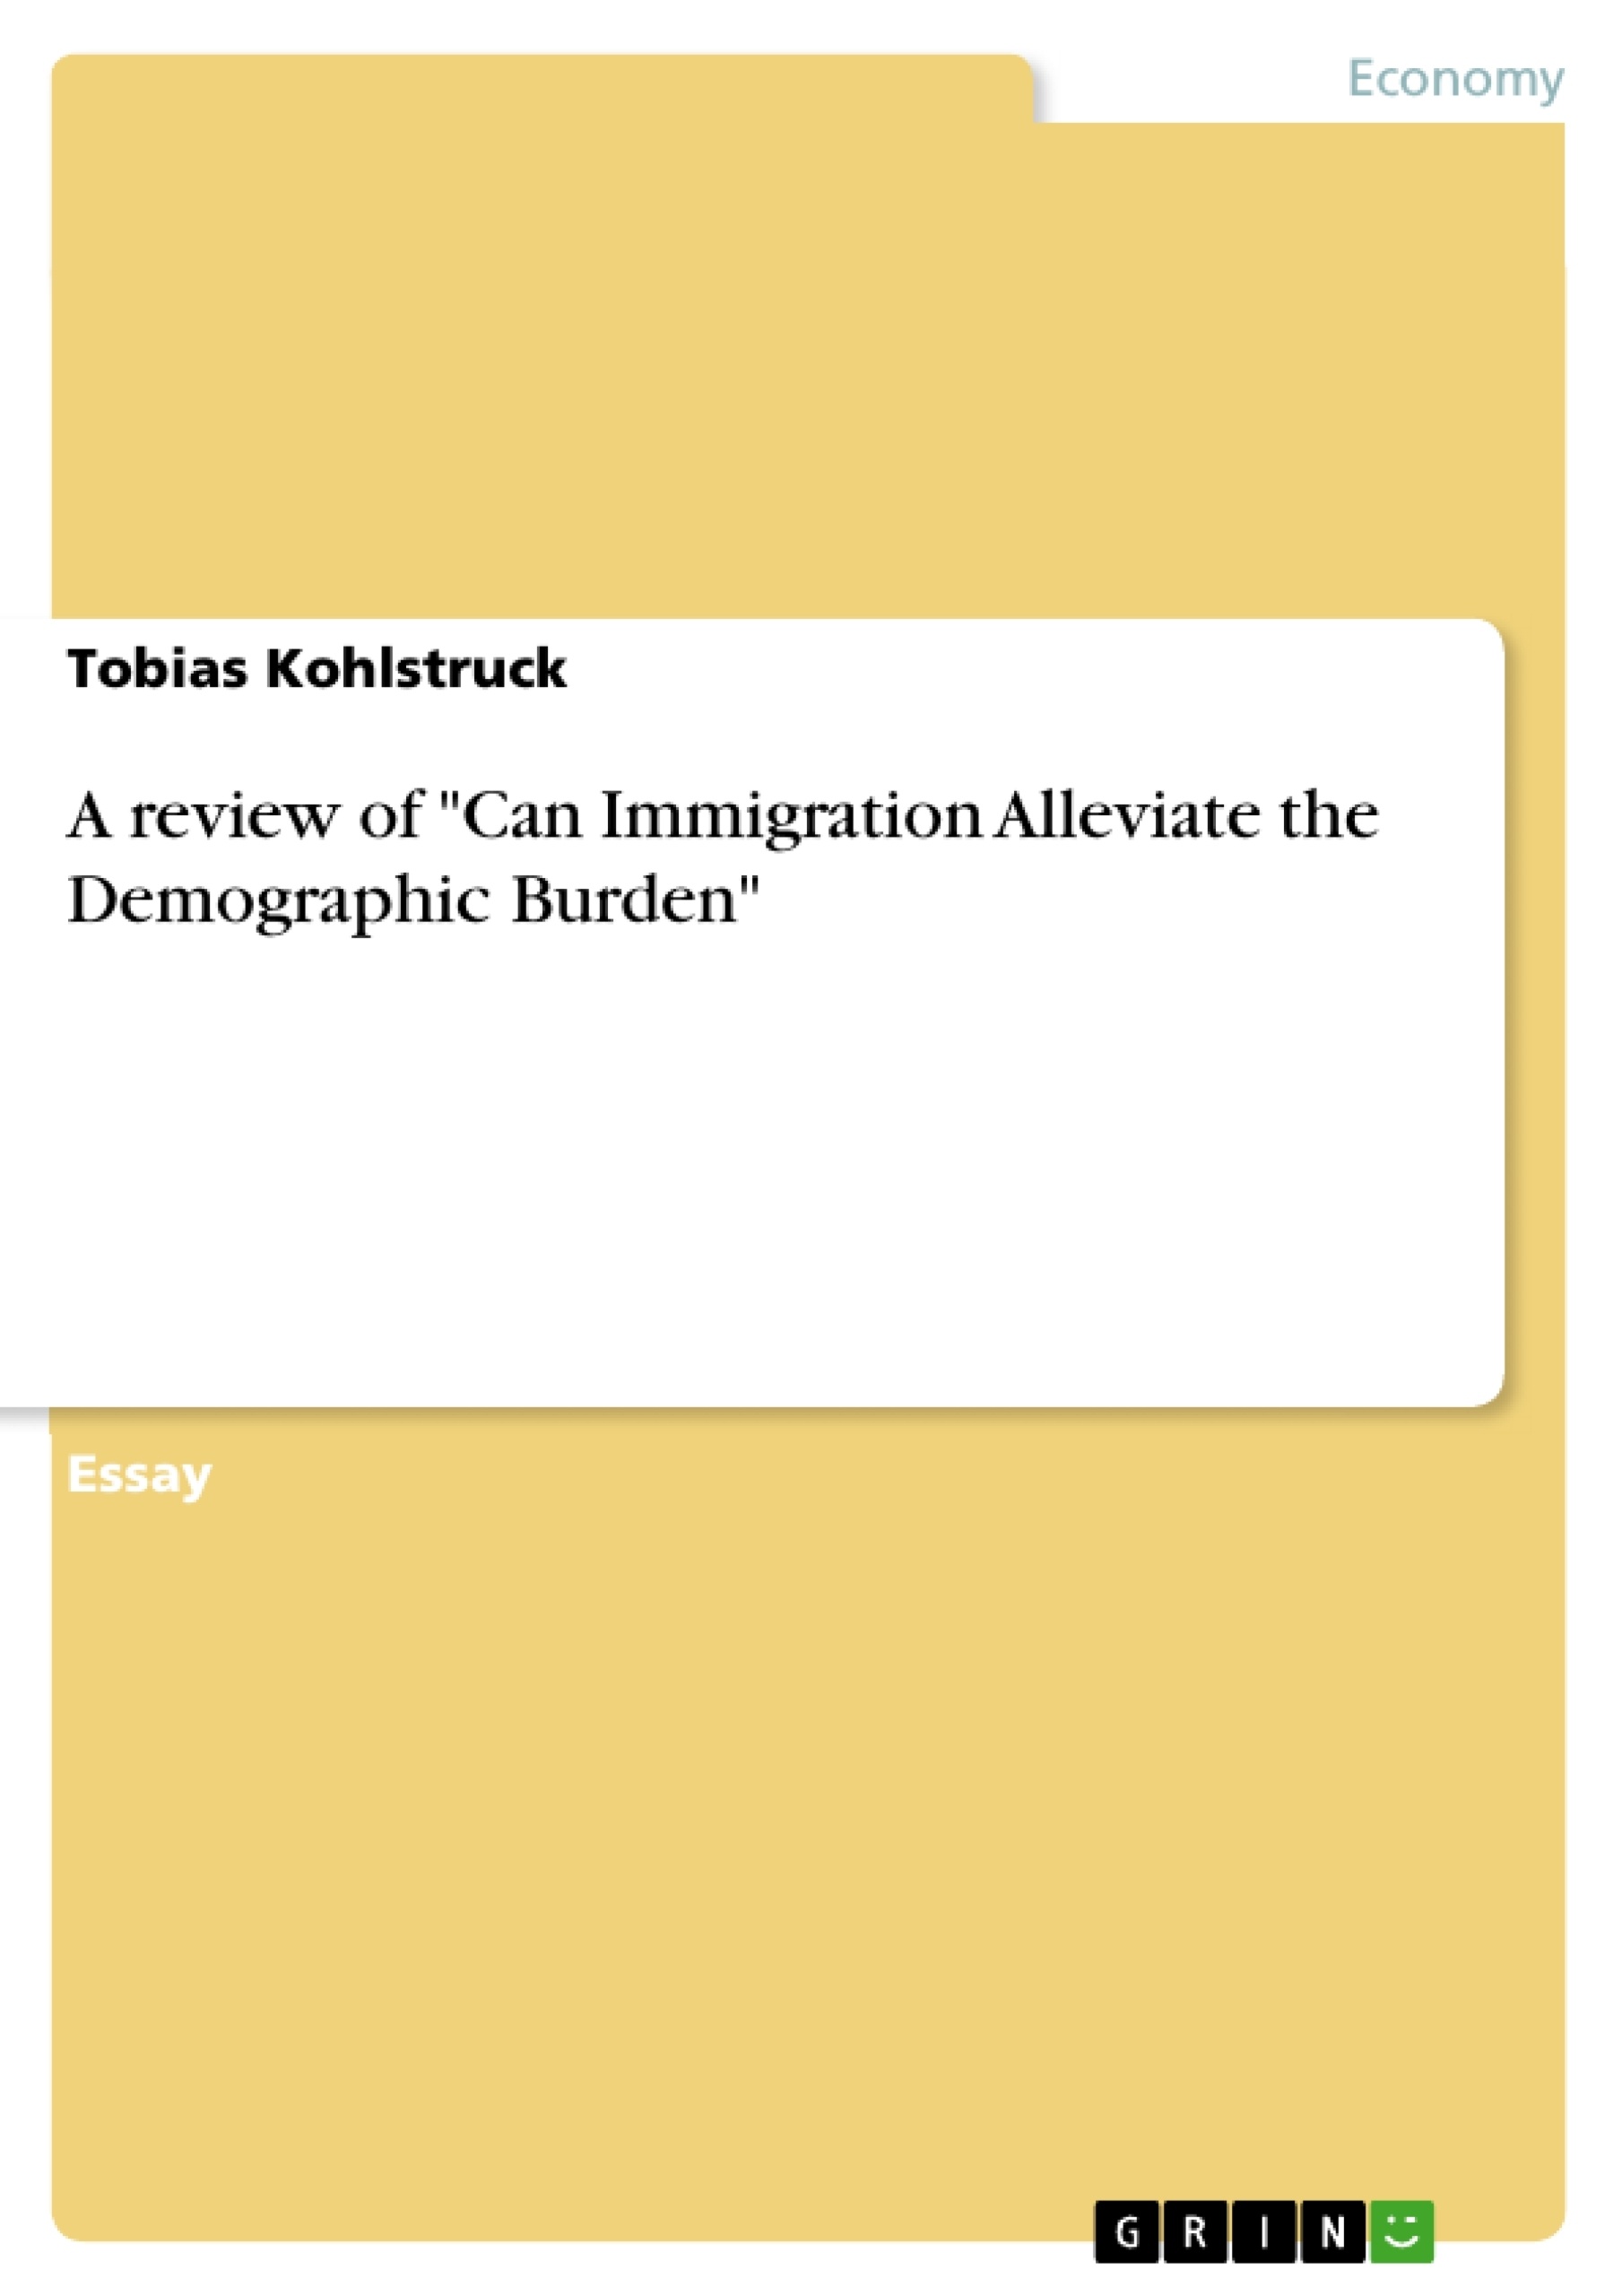 Título: A review of "Can Immigration Alleviate the Demographic Burden"